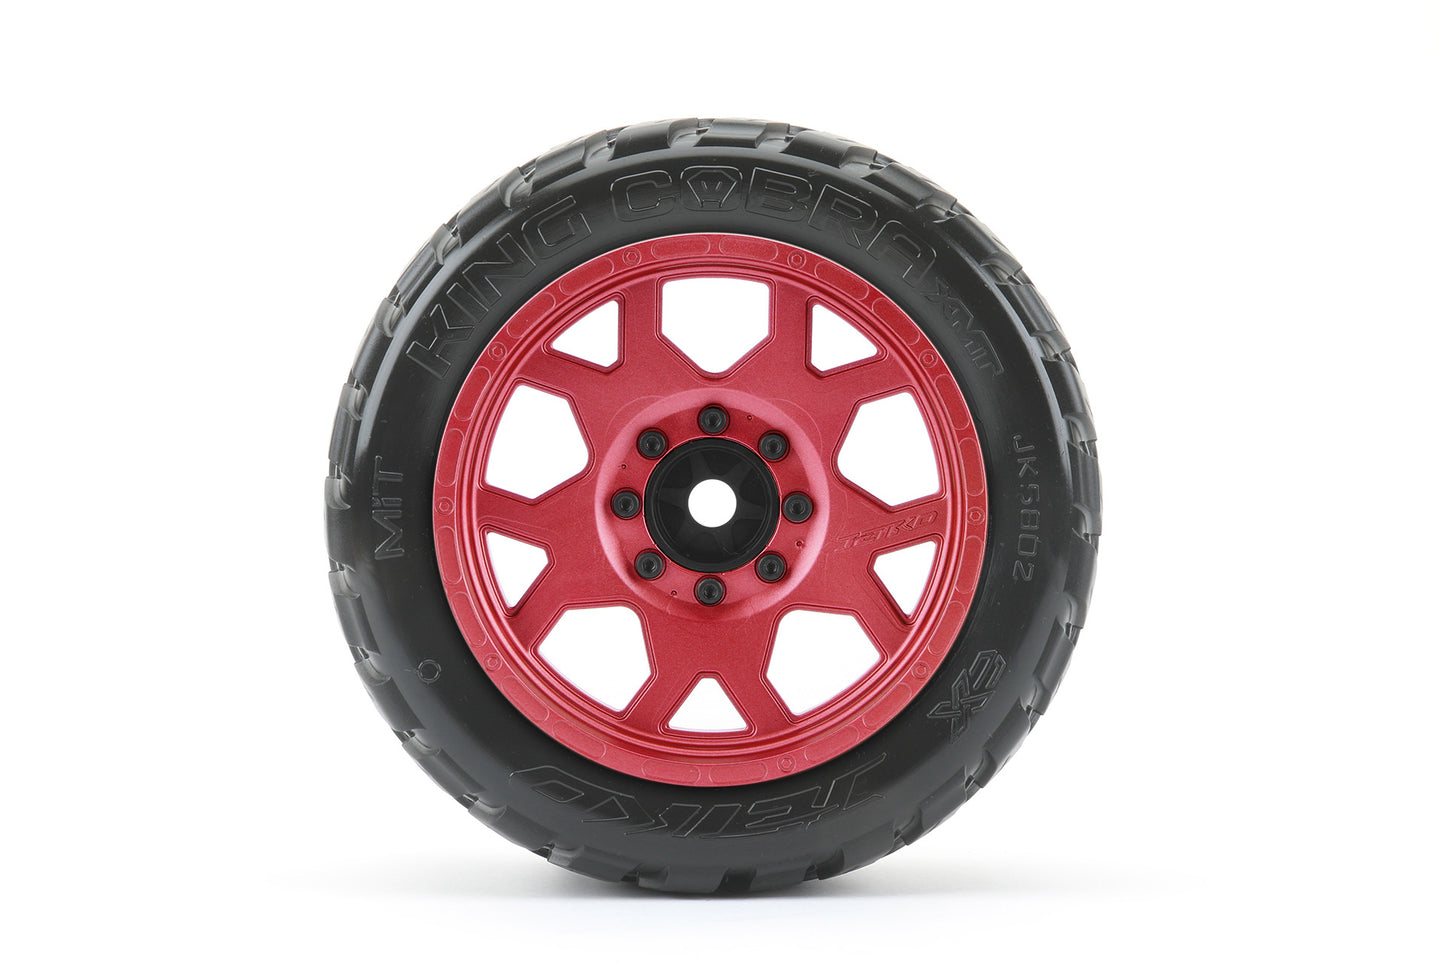 JETKO JKO5802CRMSGBB1 1/5 XMT EX-King Cobra Tires Mounted on Metal Red Claw Rims